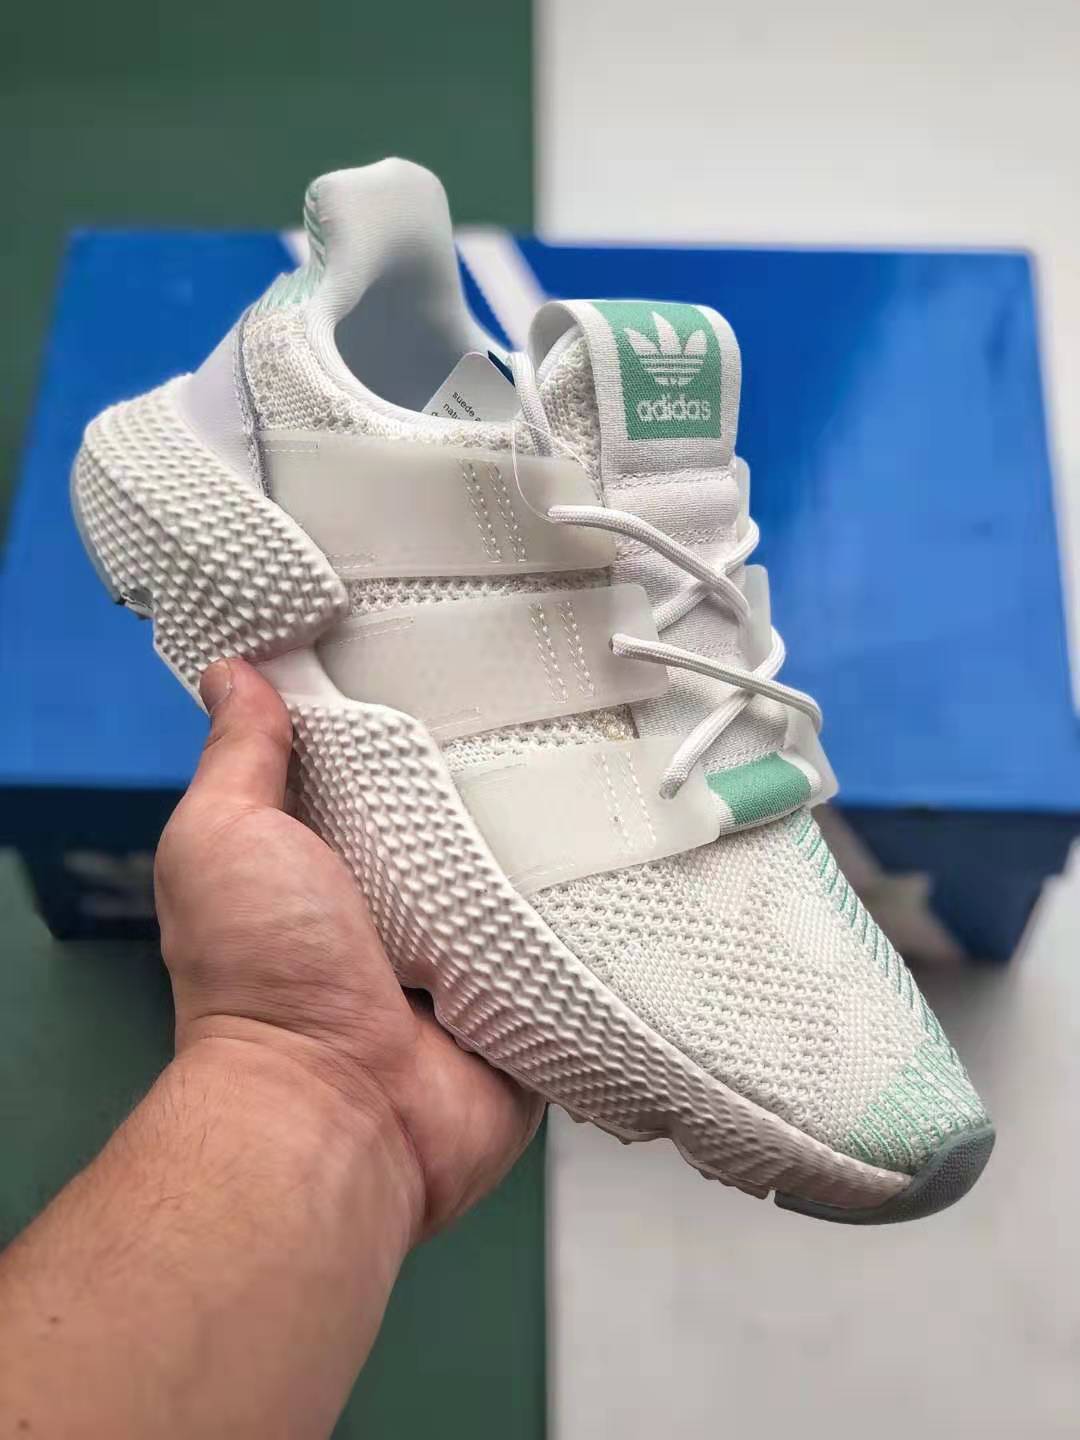 Adidas Originals Prophere White Green: Buy Now at Competitive Prices